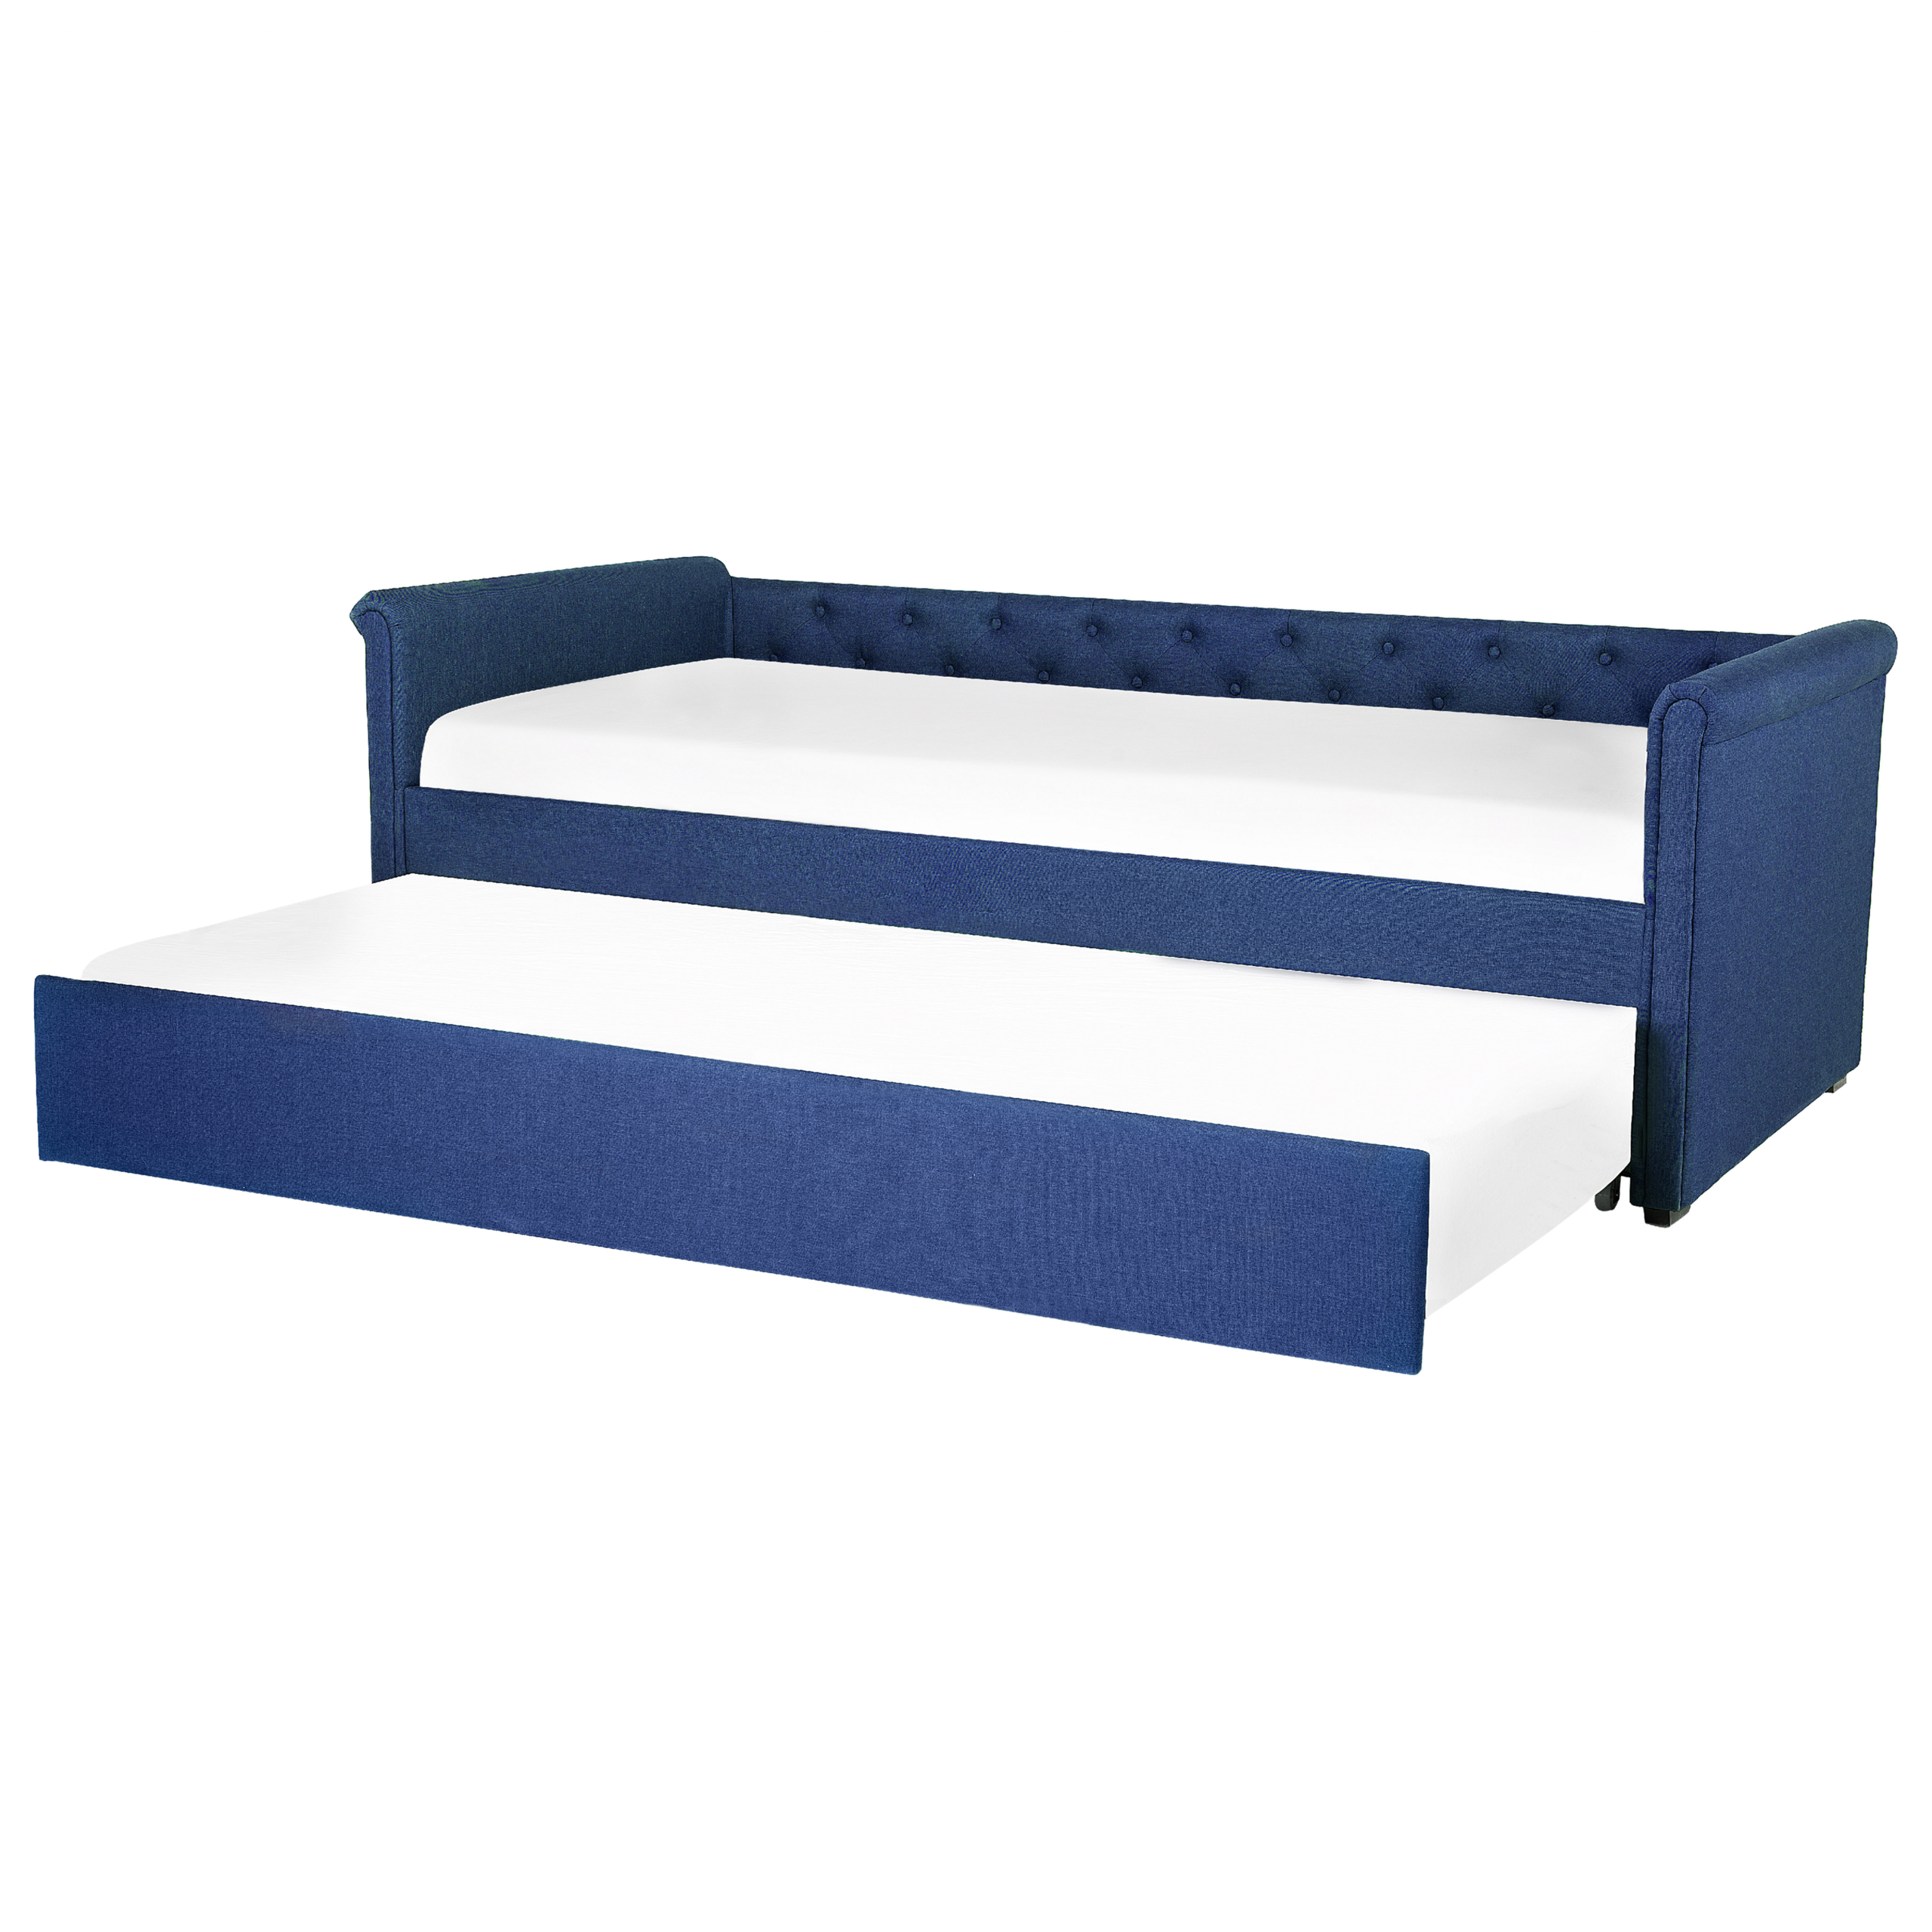 Beliani Trundle Bed Blue Fabric Upholstery EU Small Single Size Guest Underbed Buttoned